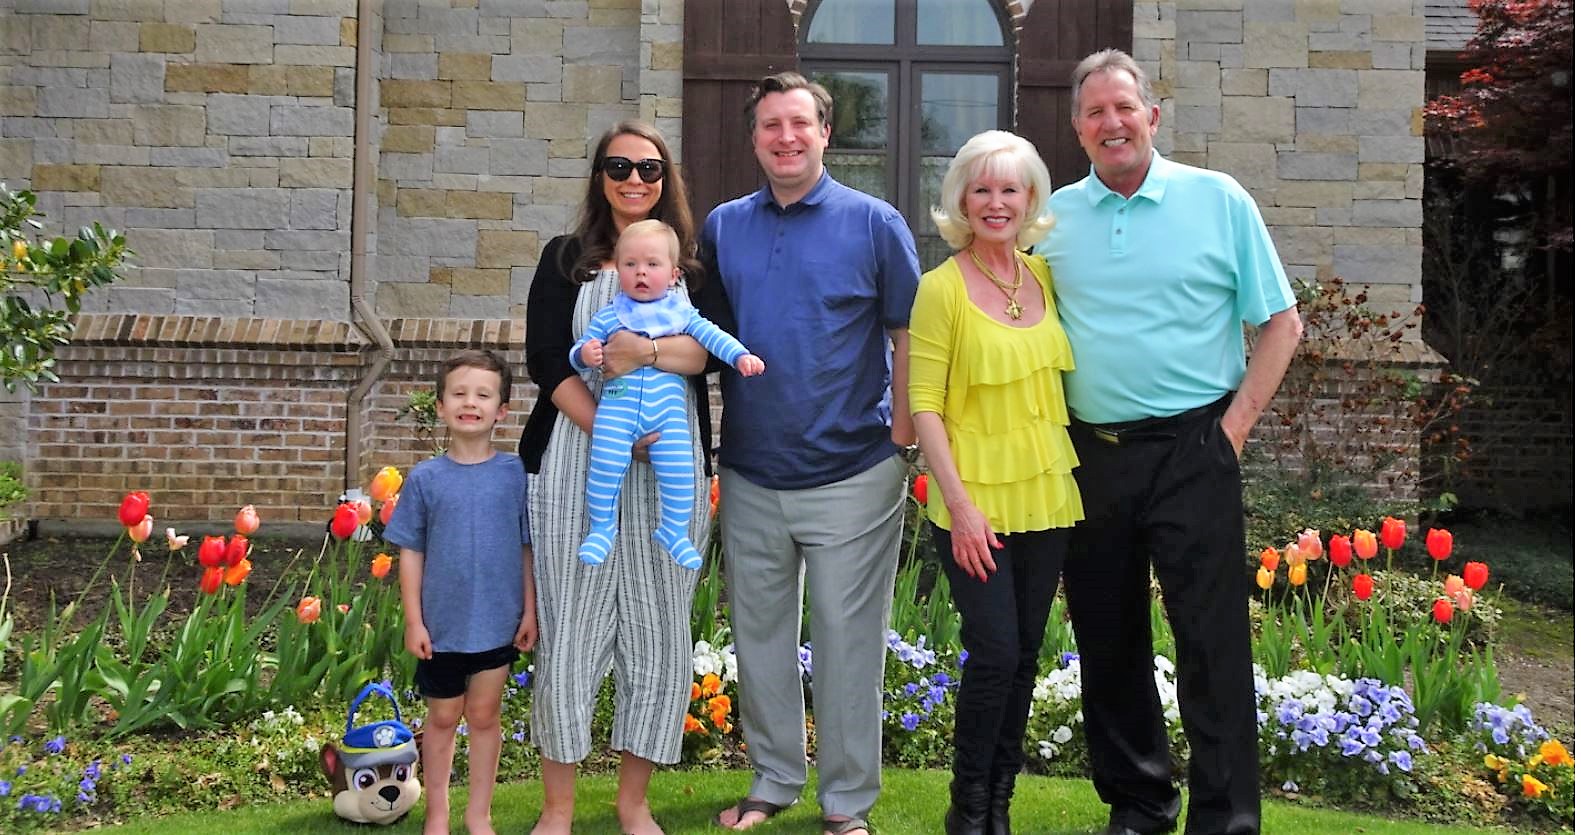 Kevin Kirksey (far right) on Easter with his wife, son and his family (Photo courtesy of Kevin Kirksey)